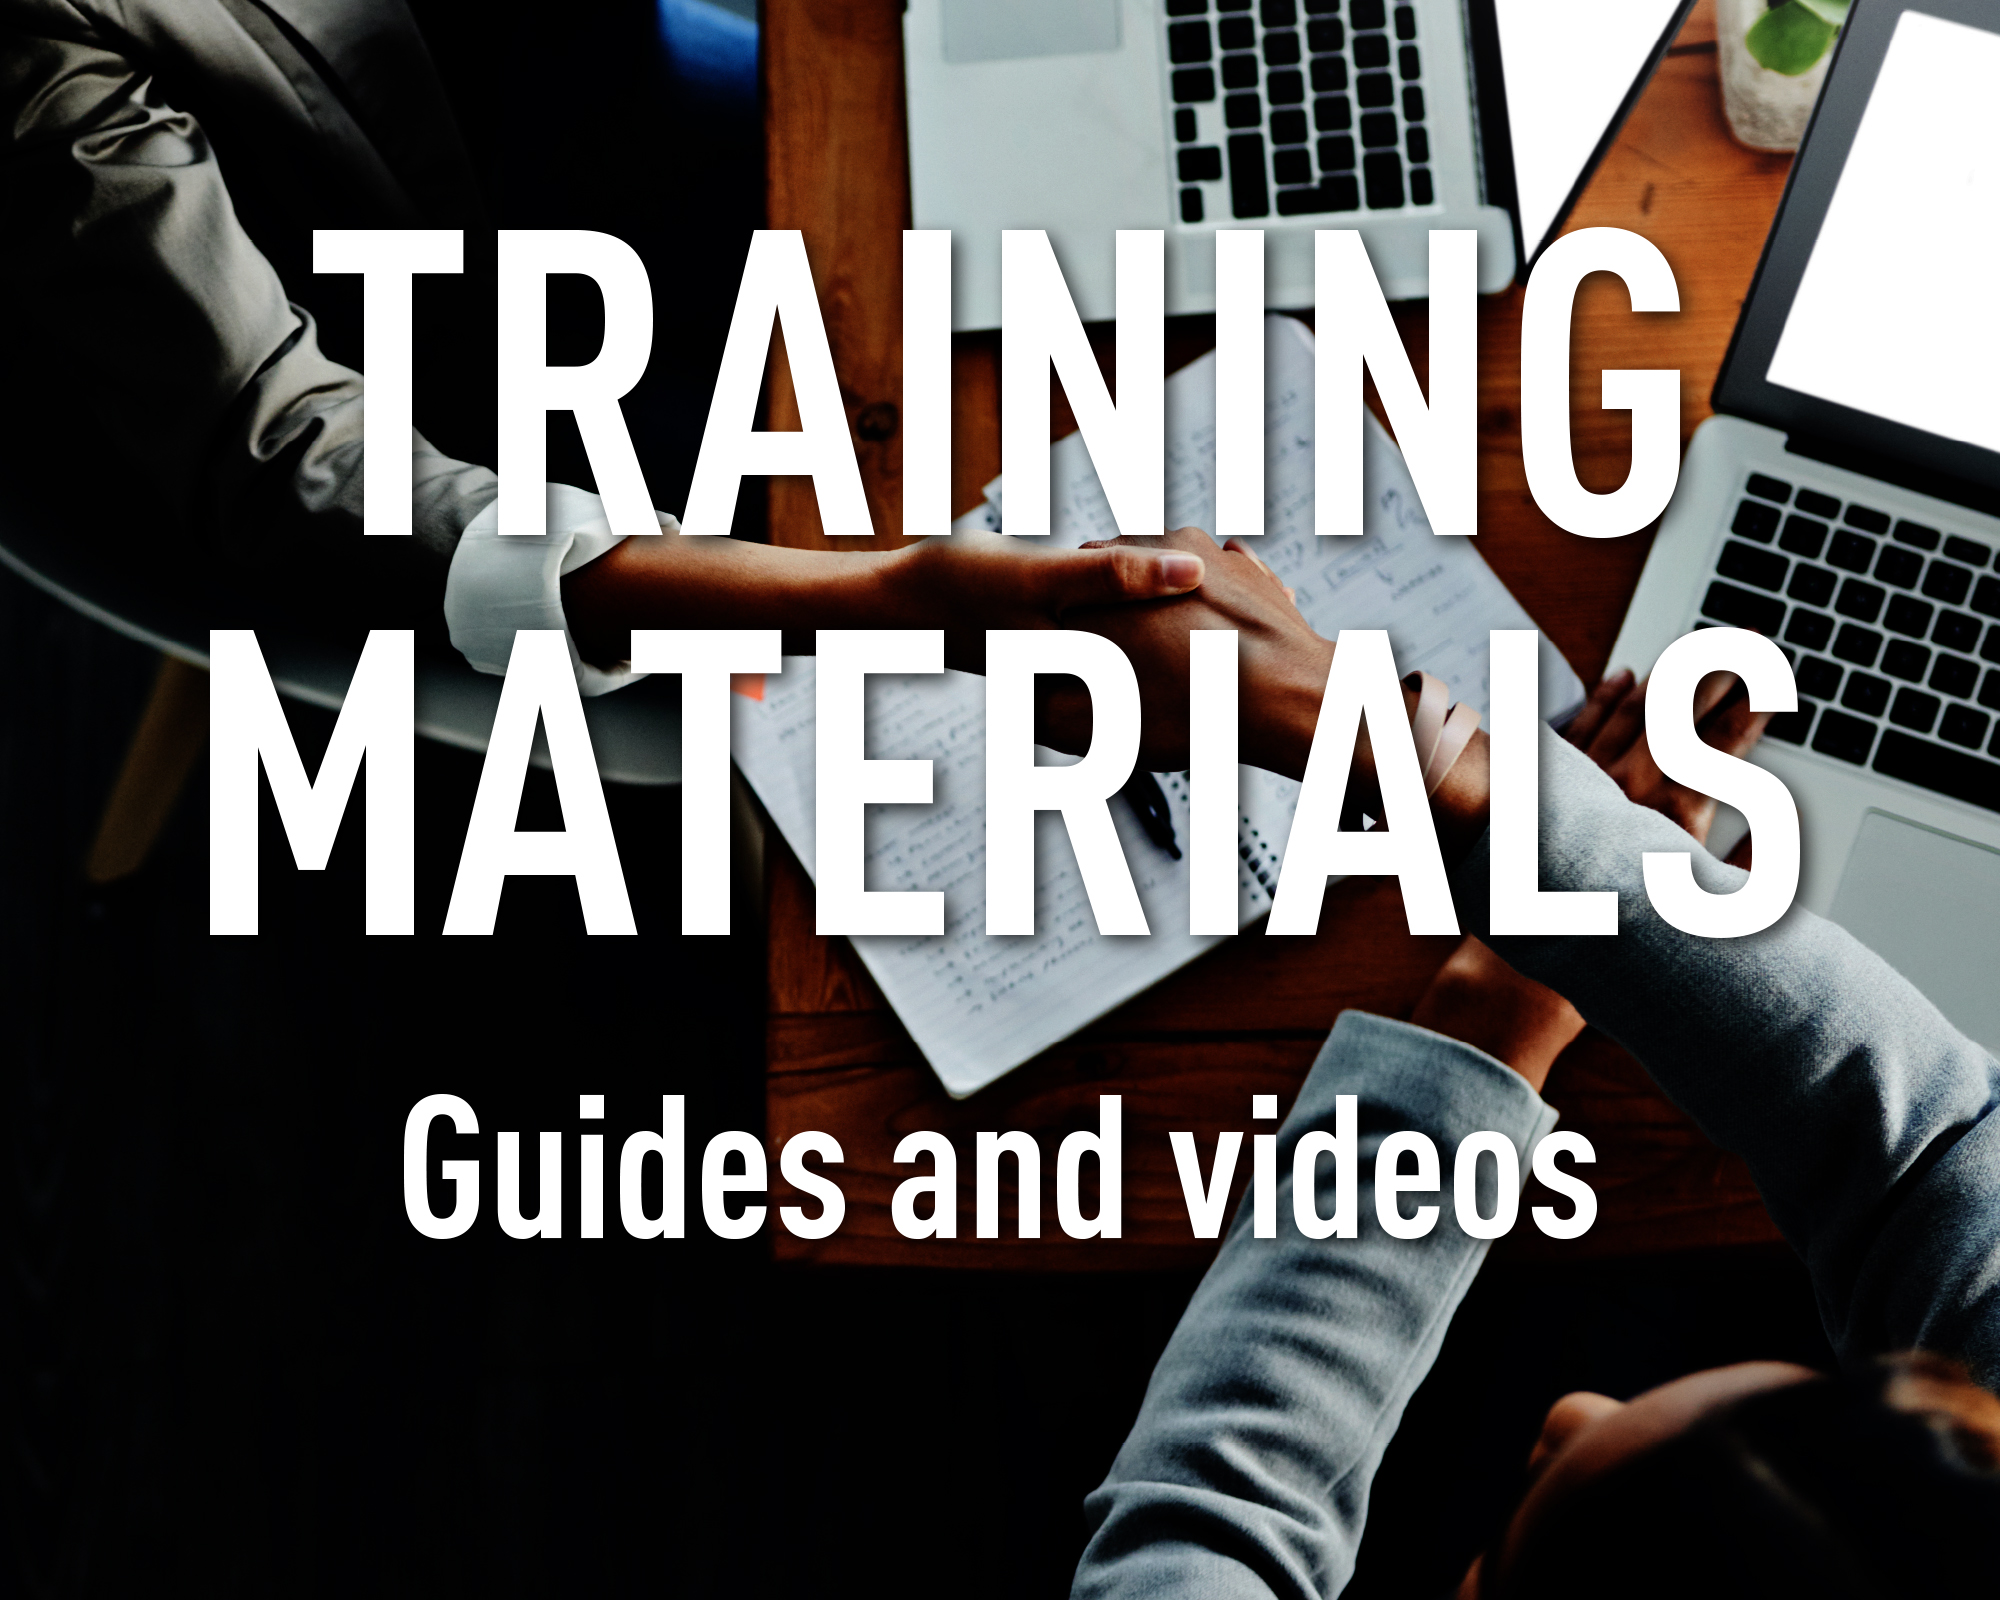 Training Materials. Guides and videos